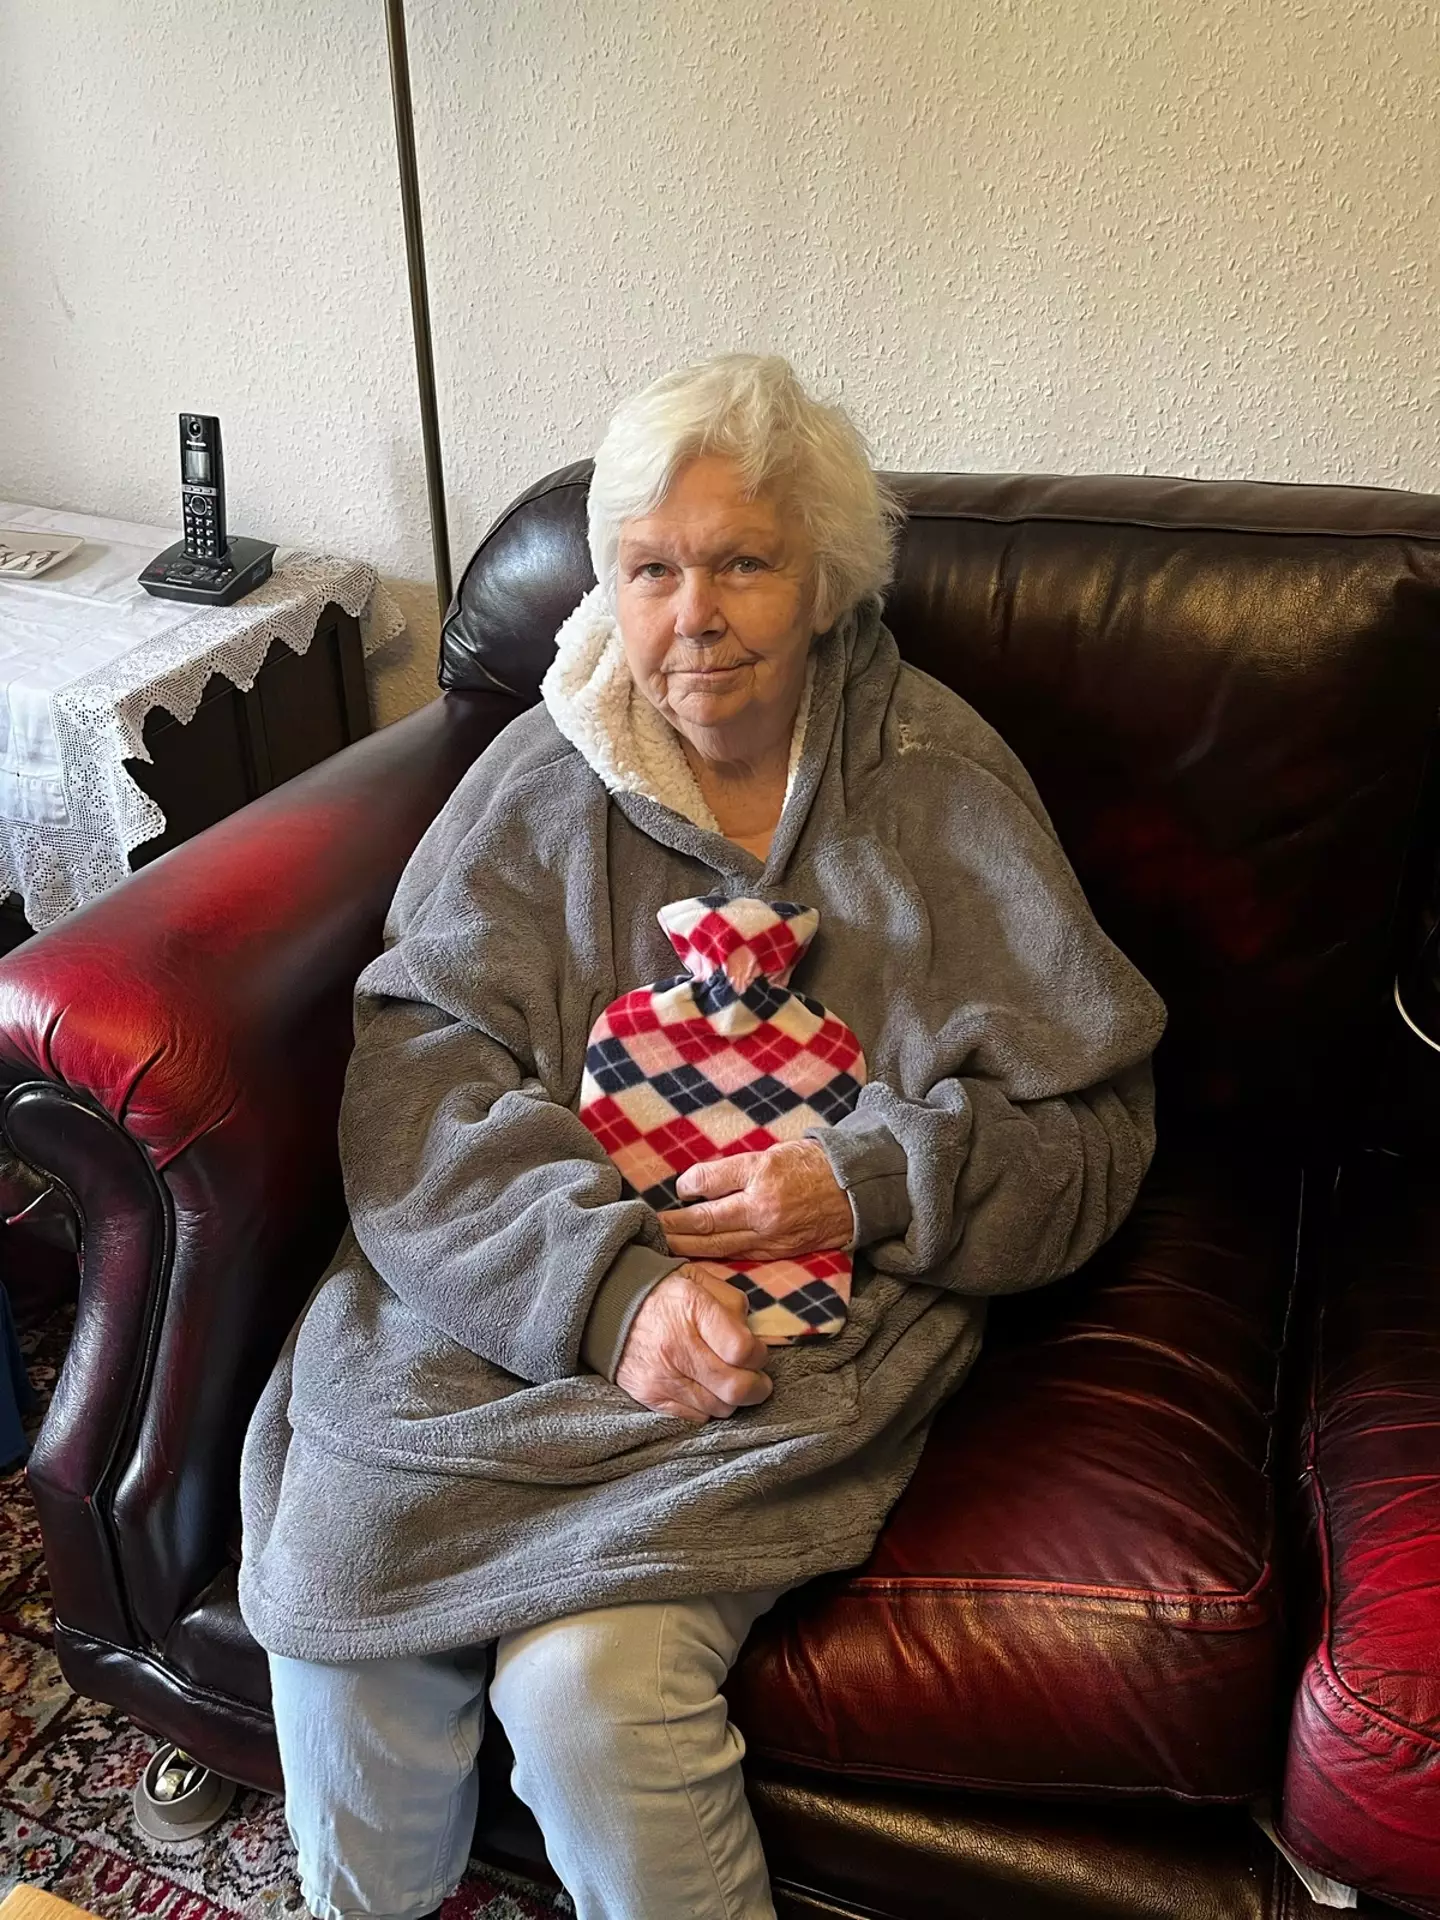 Mair was recently diagnosed with vascular dementia.